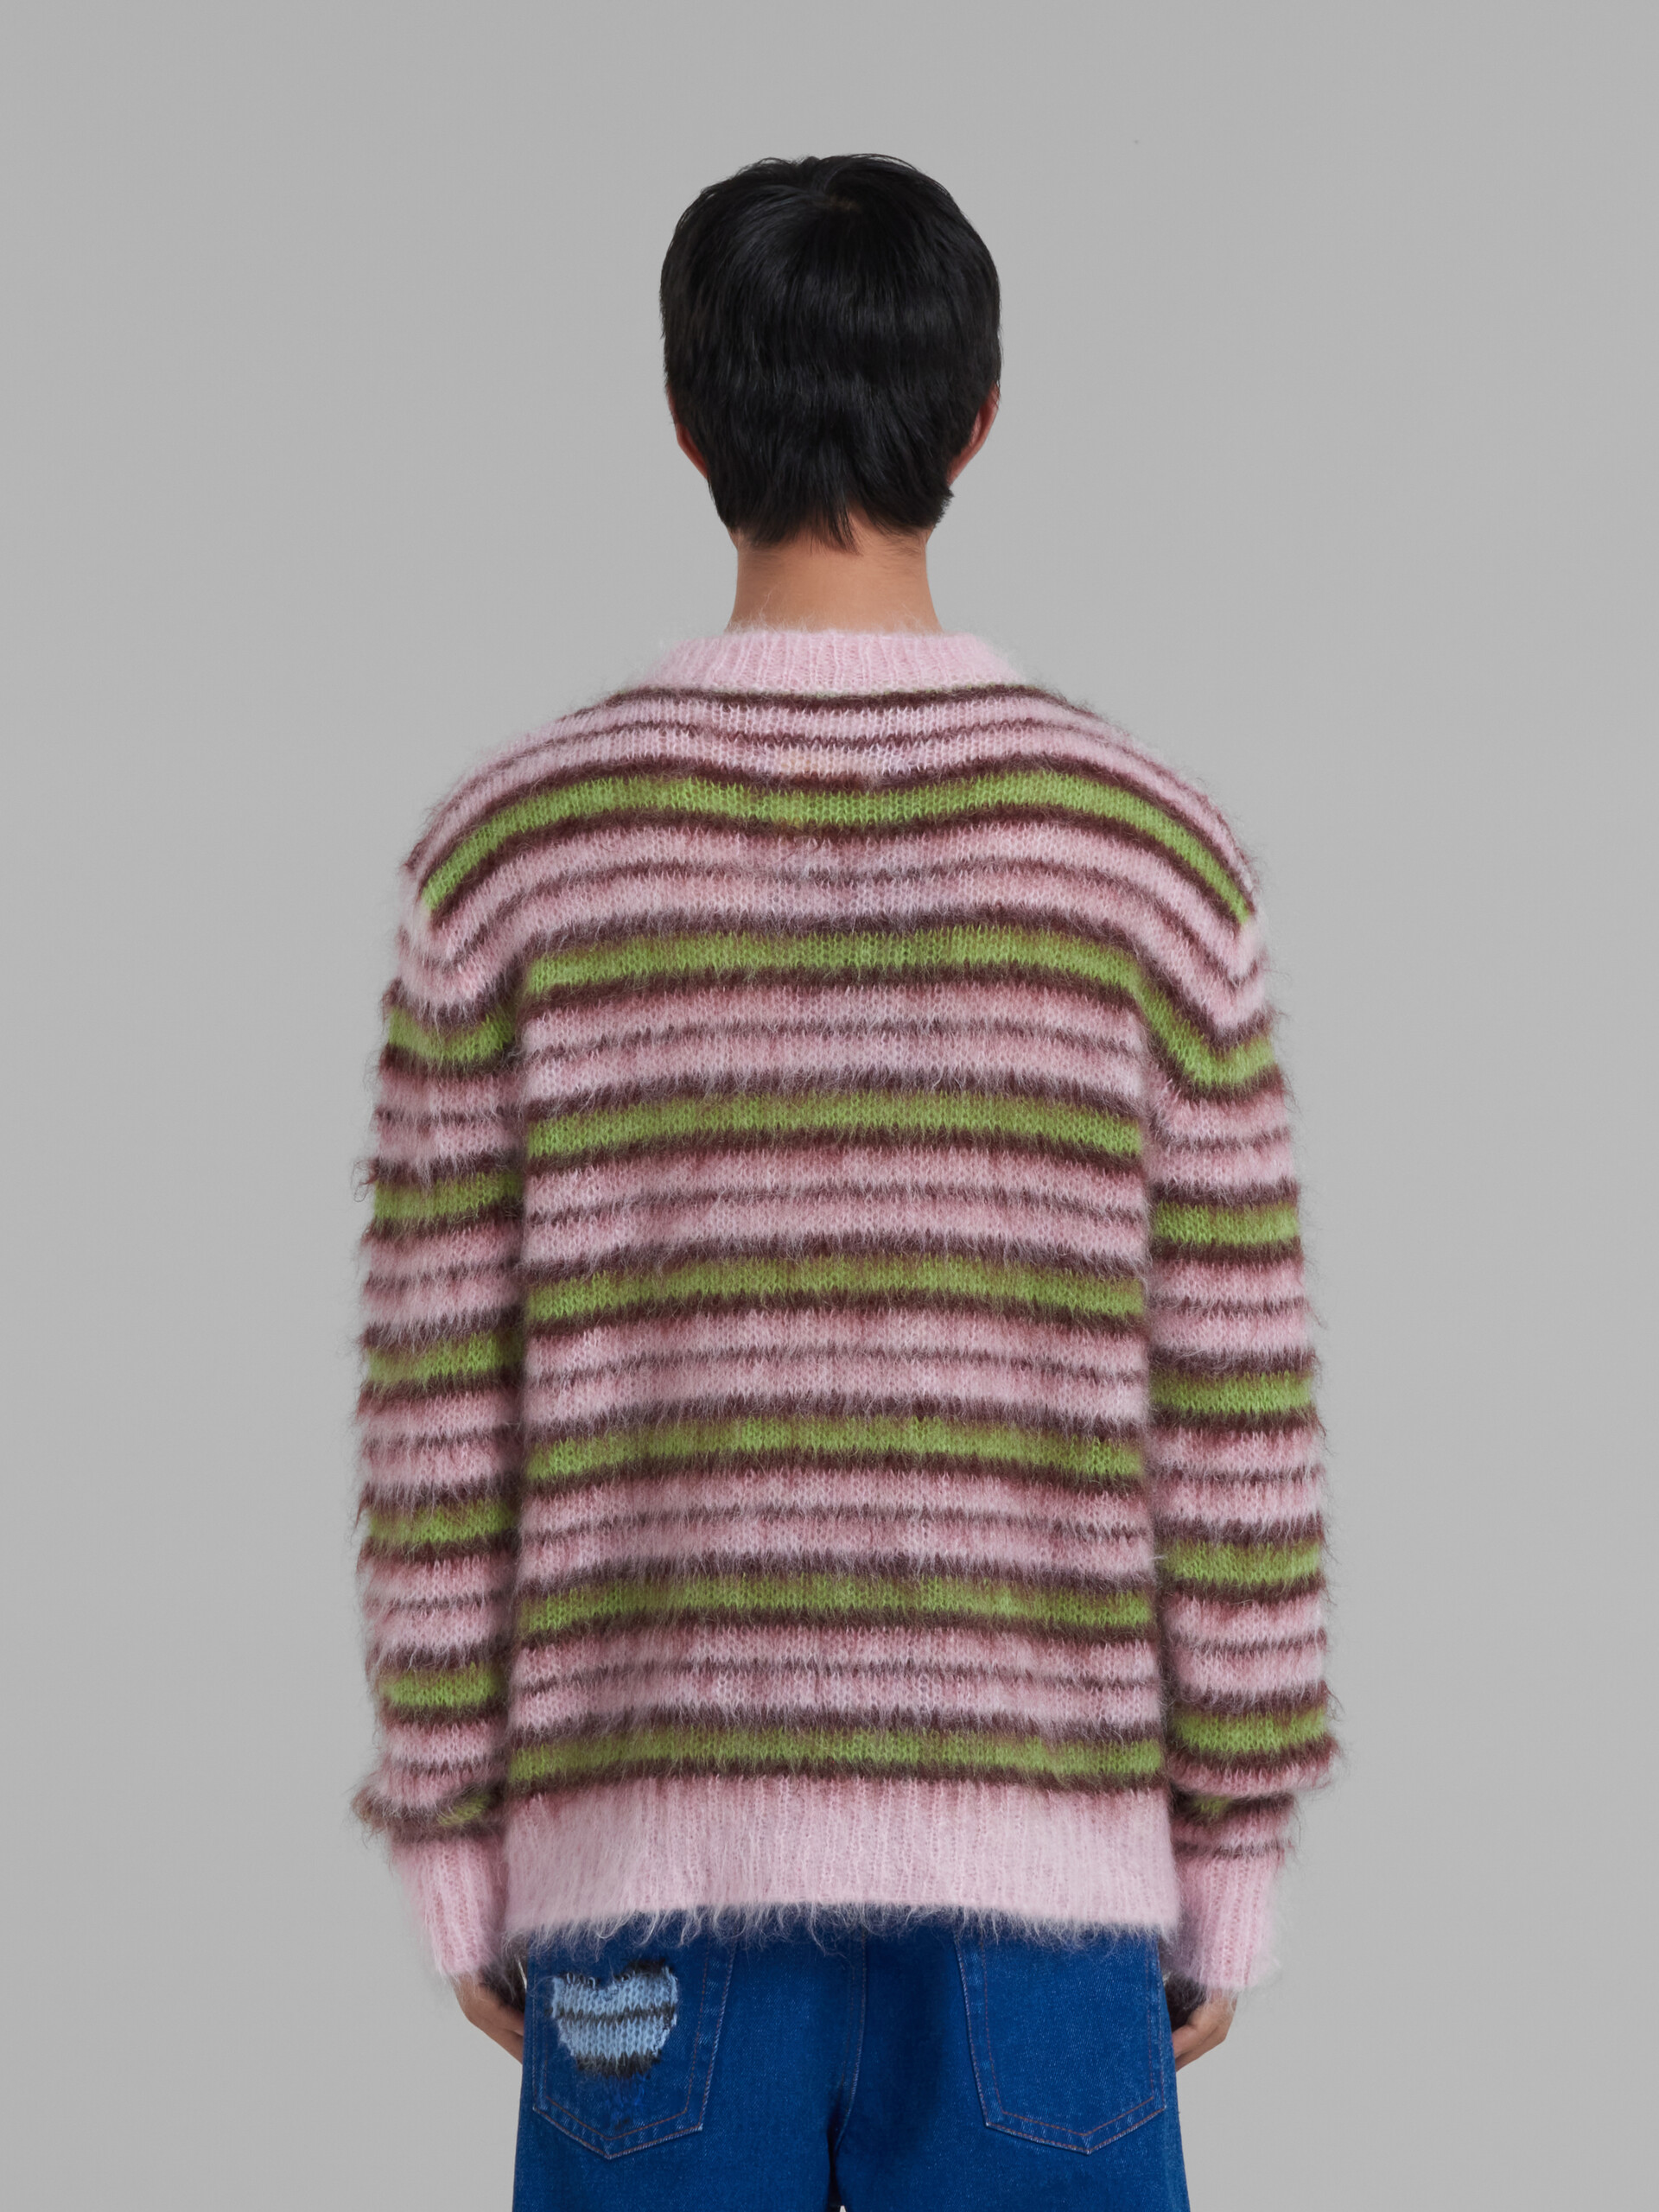 Turquoise striped mohair sweater - Pullovers - Image 3